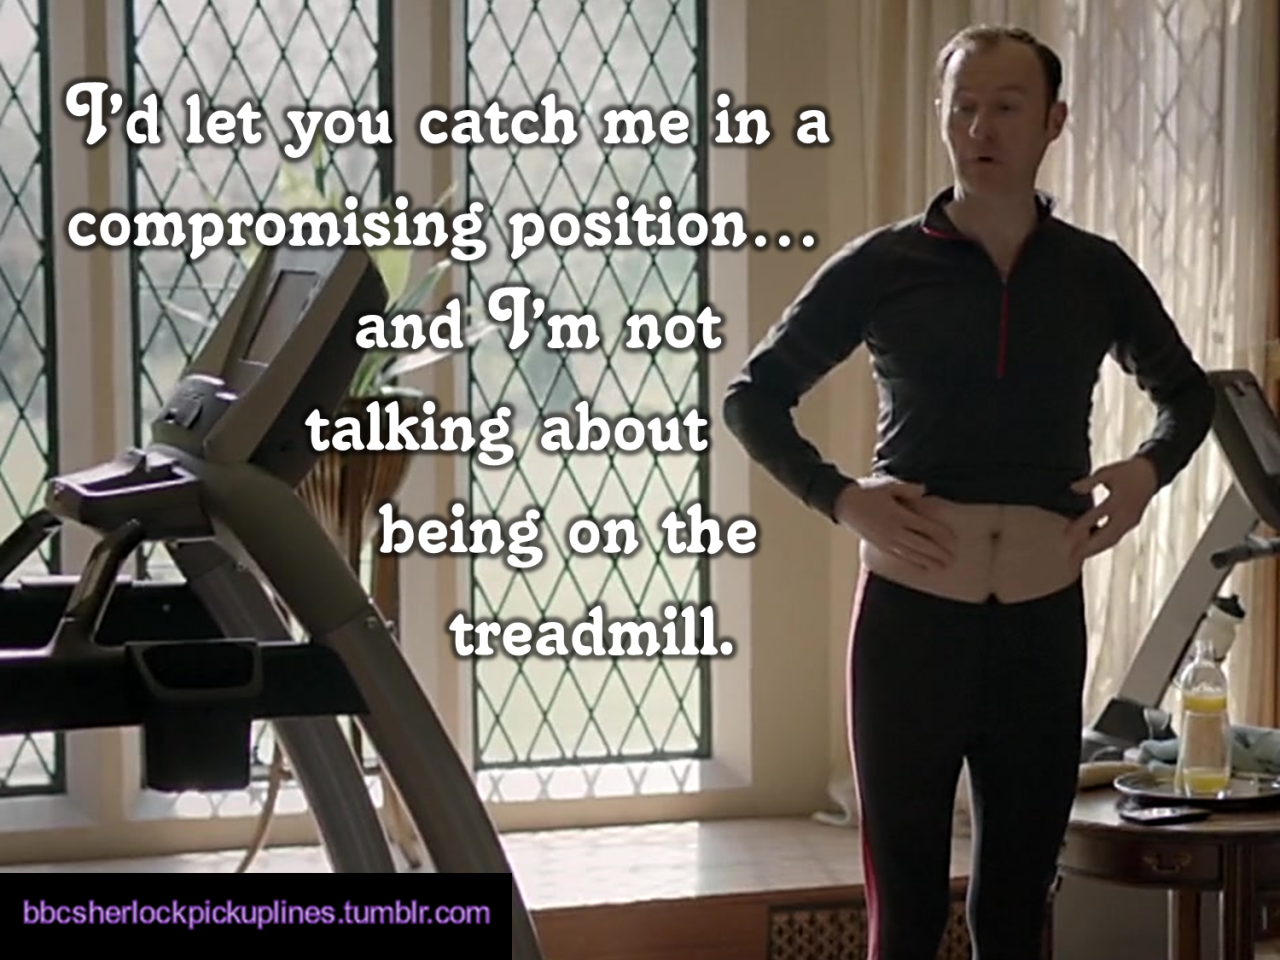 &ldquo;I&rsquo;d let you catch me in a compromising position&hellip;